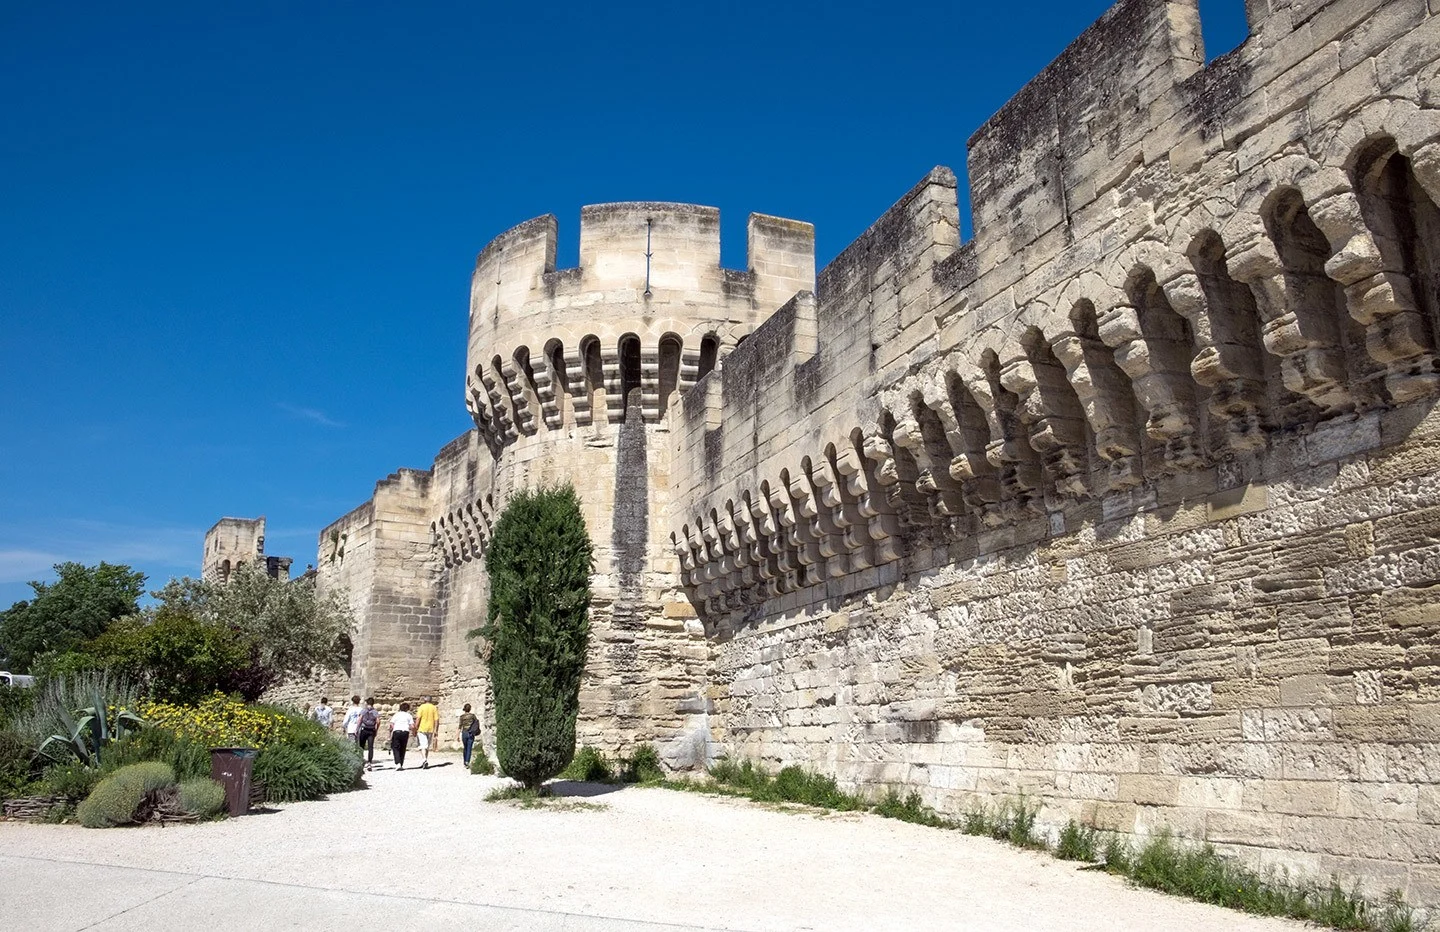 The city walls in Avignon, South of France